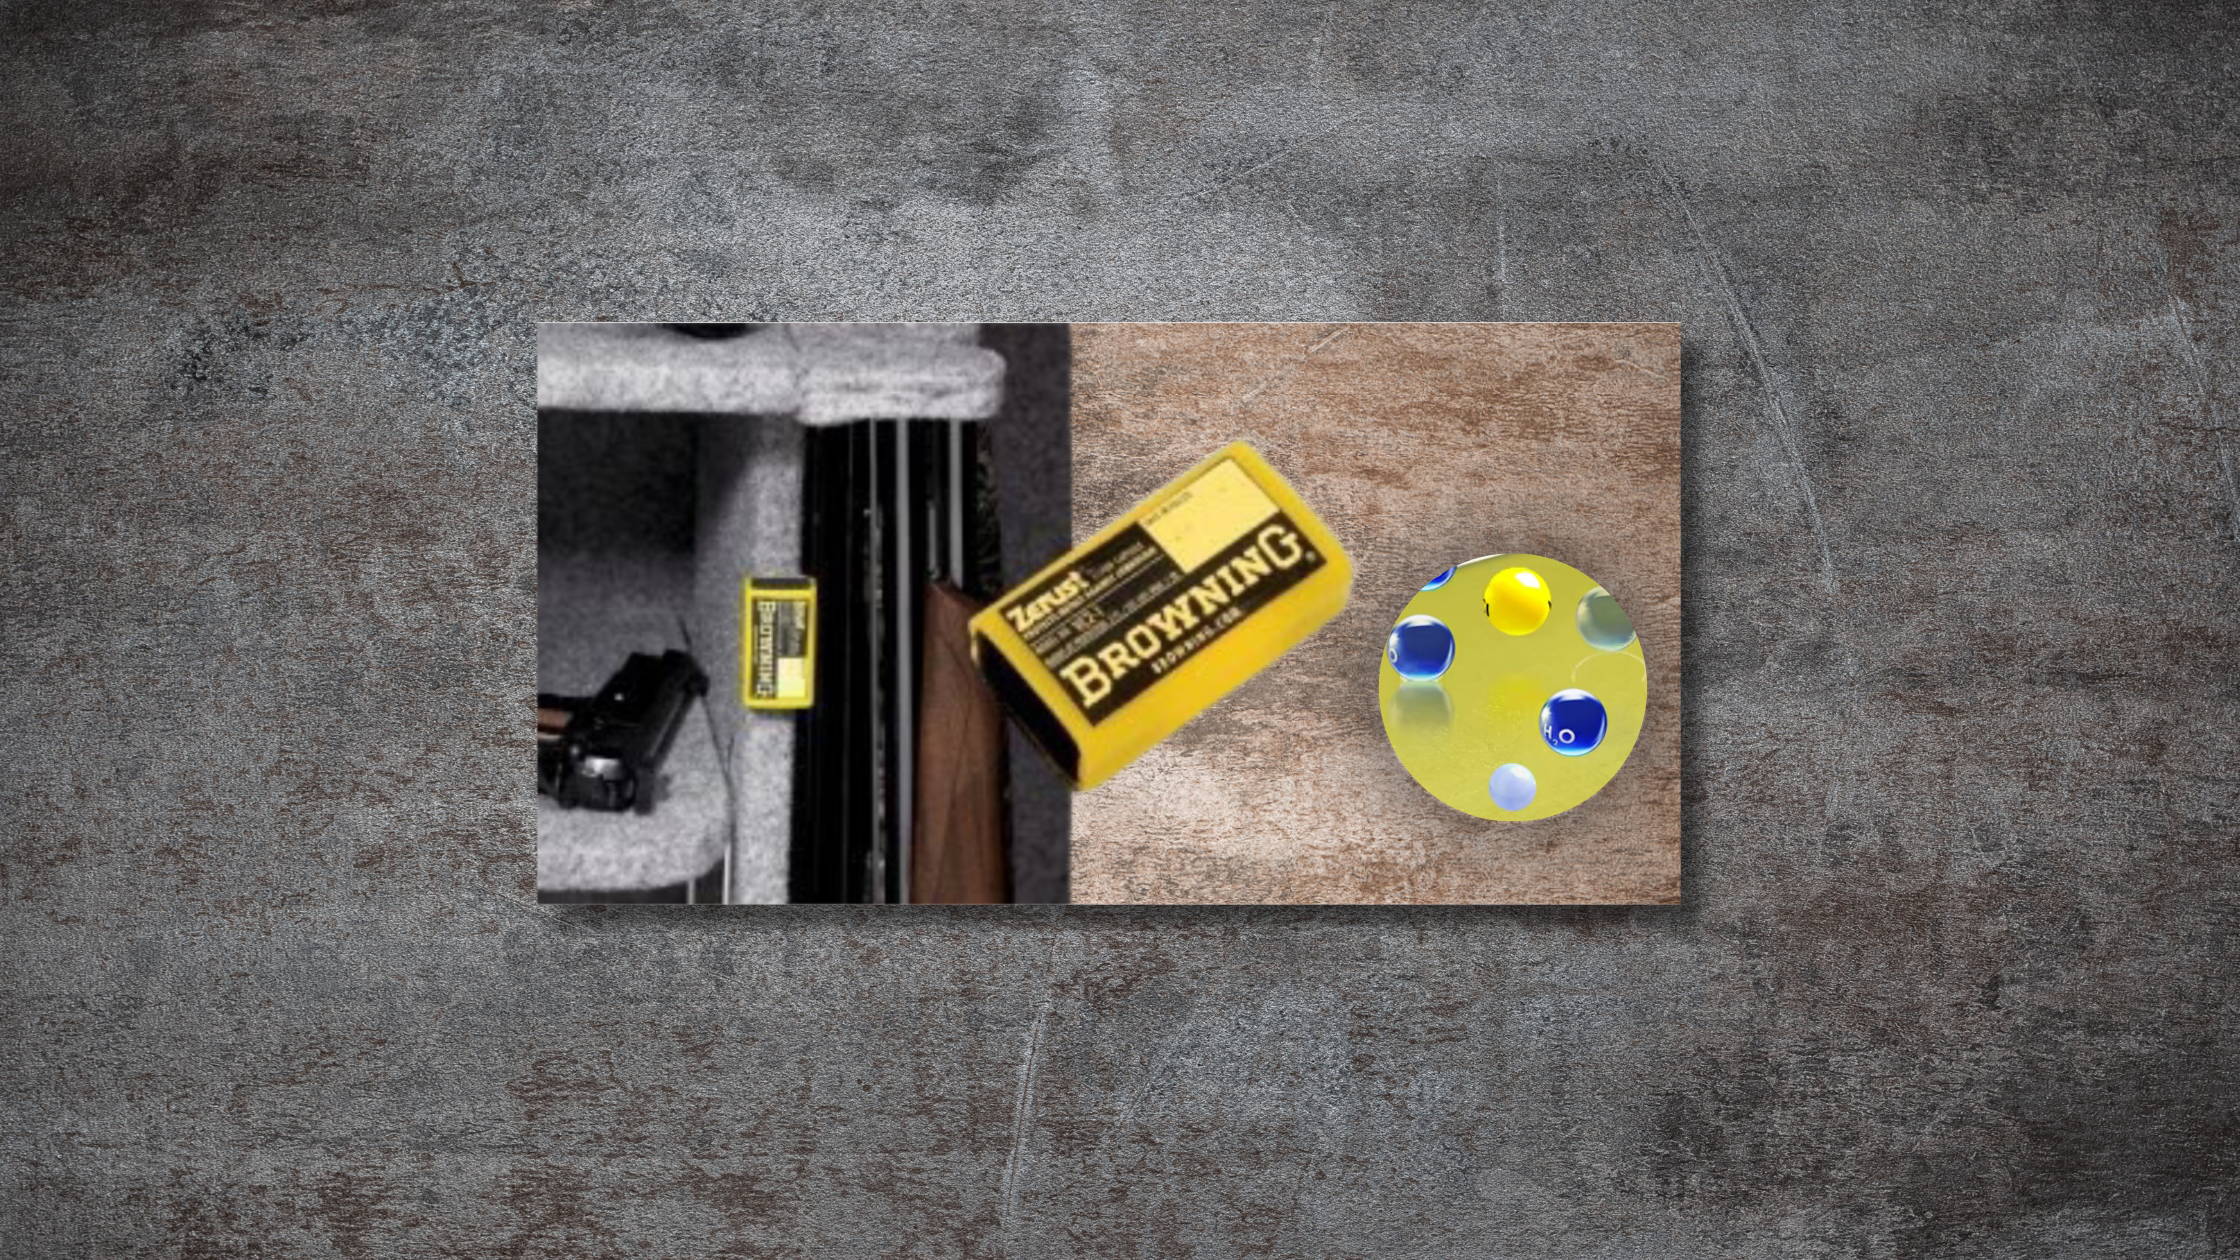 Vapor Corrosion Inhibitor (VCI) Technology Options for Browning Safes